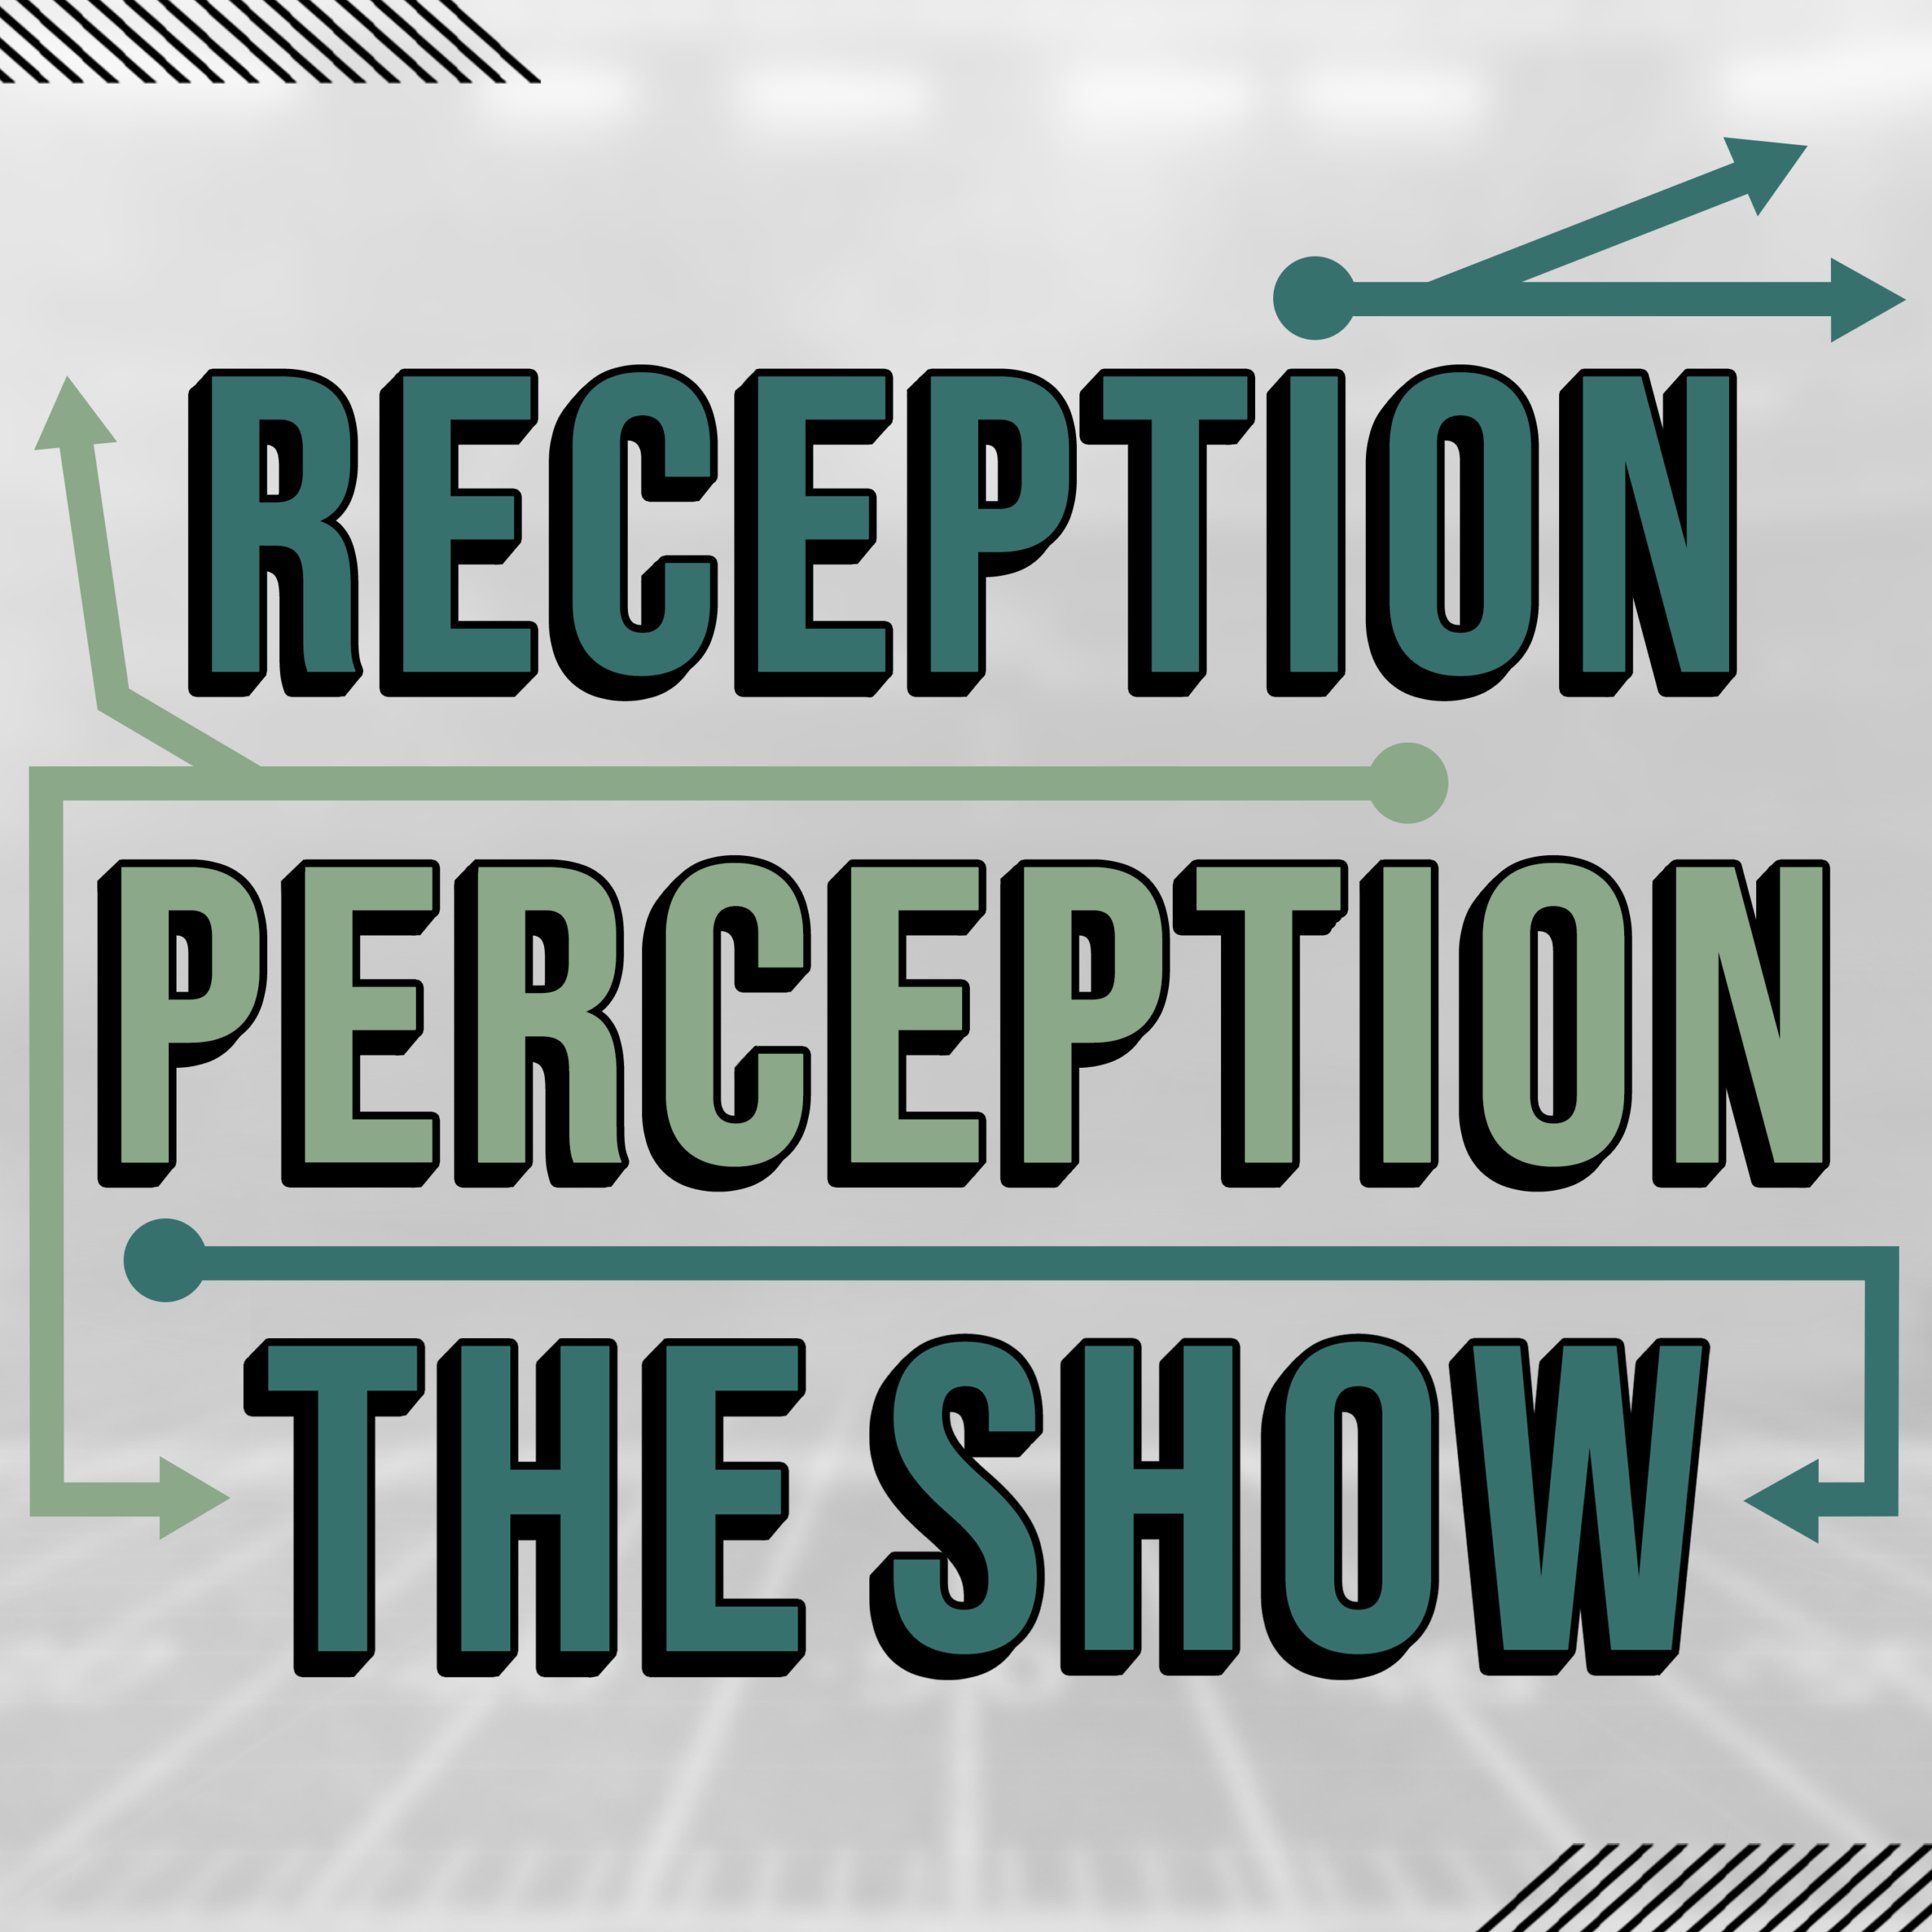 Reception Perception The Show – Saints, Sutton and Sleepers After Week One